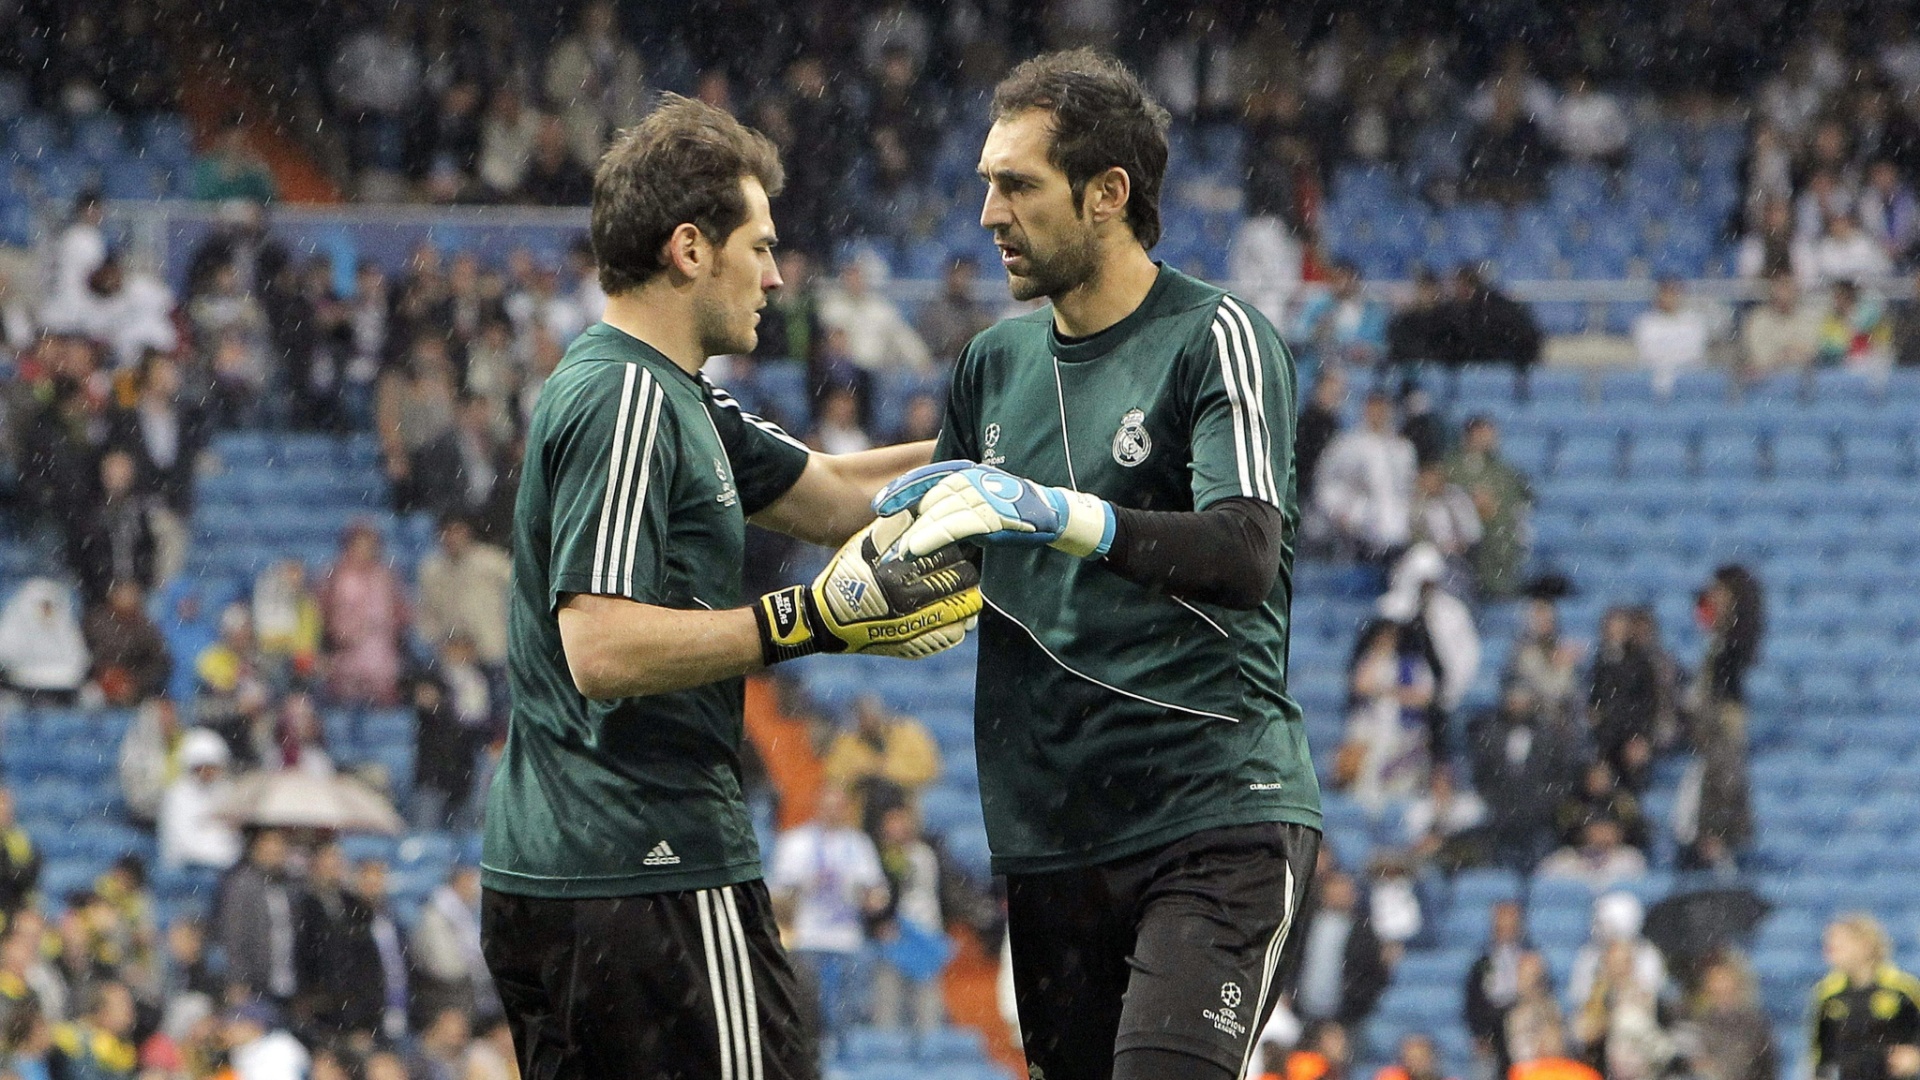 Casillas or Diego Lopez, Who should be the holder Real Madrid goalkeeper?